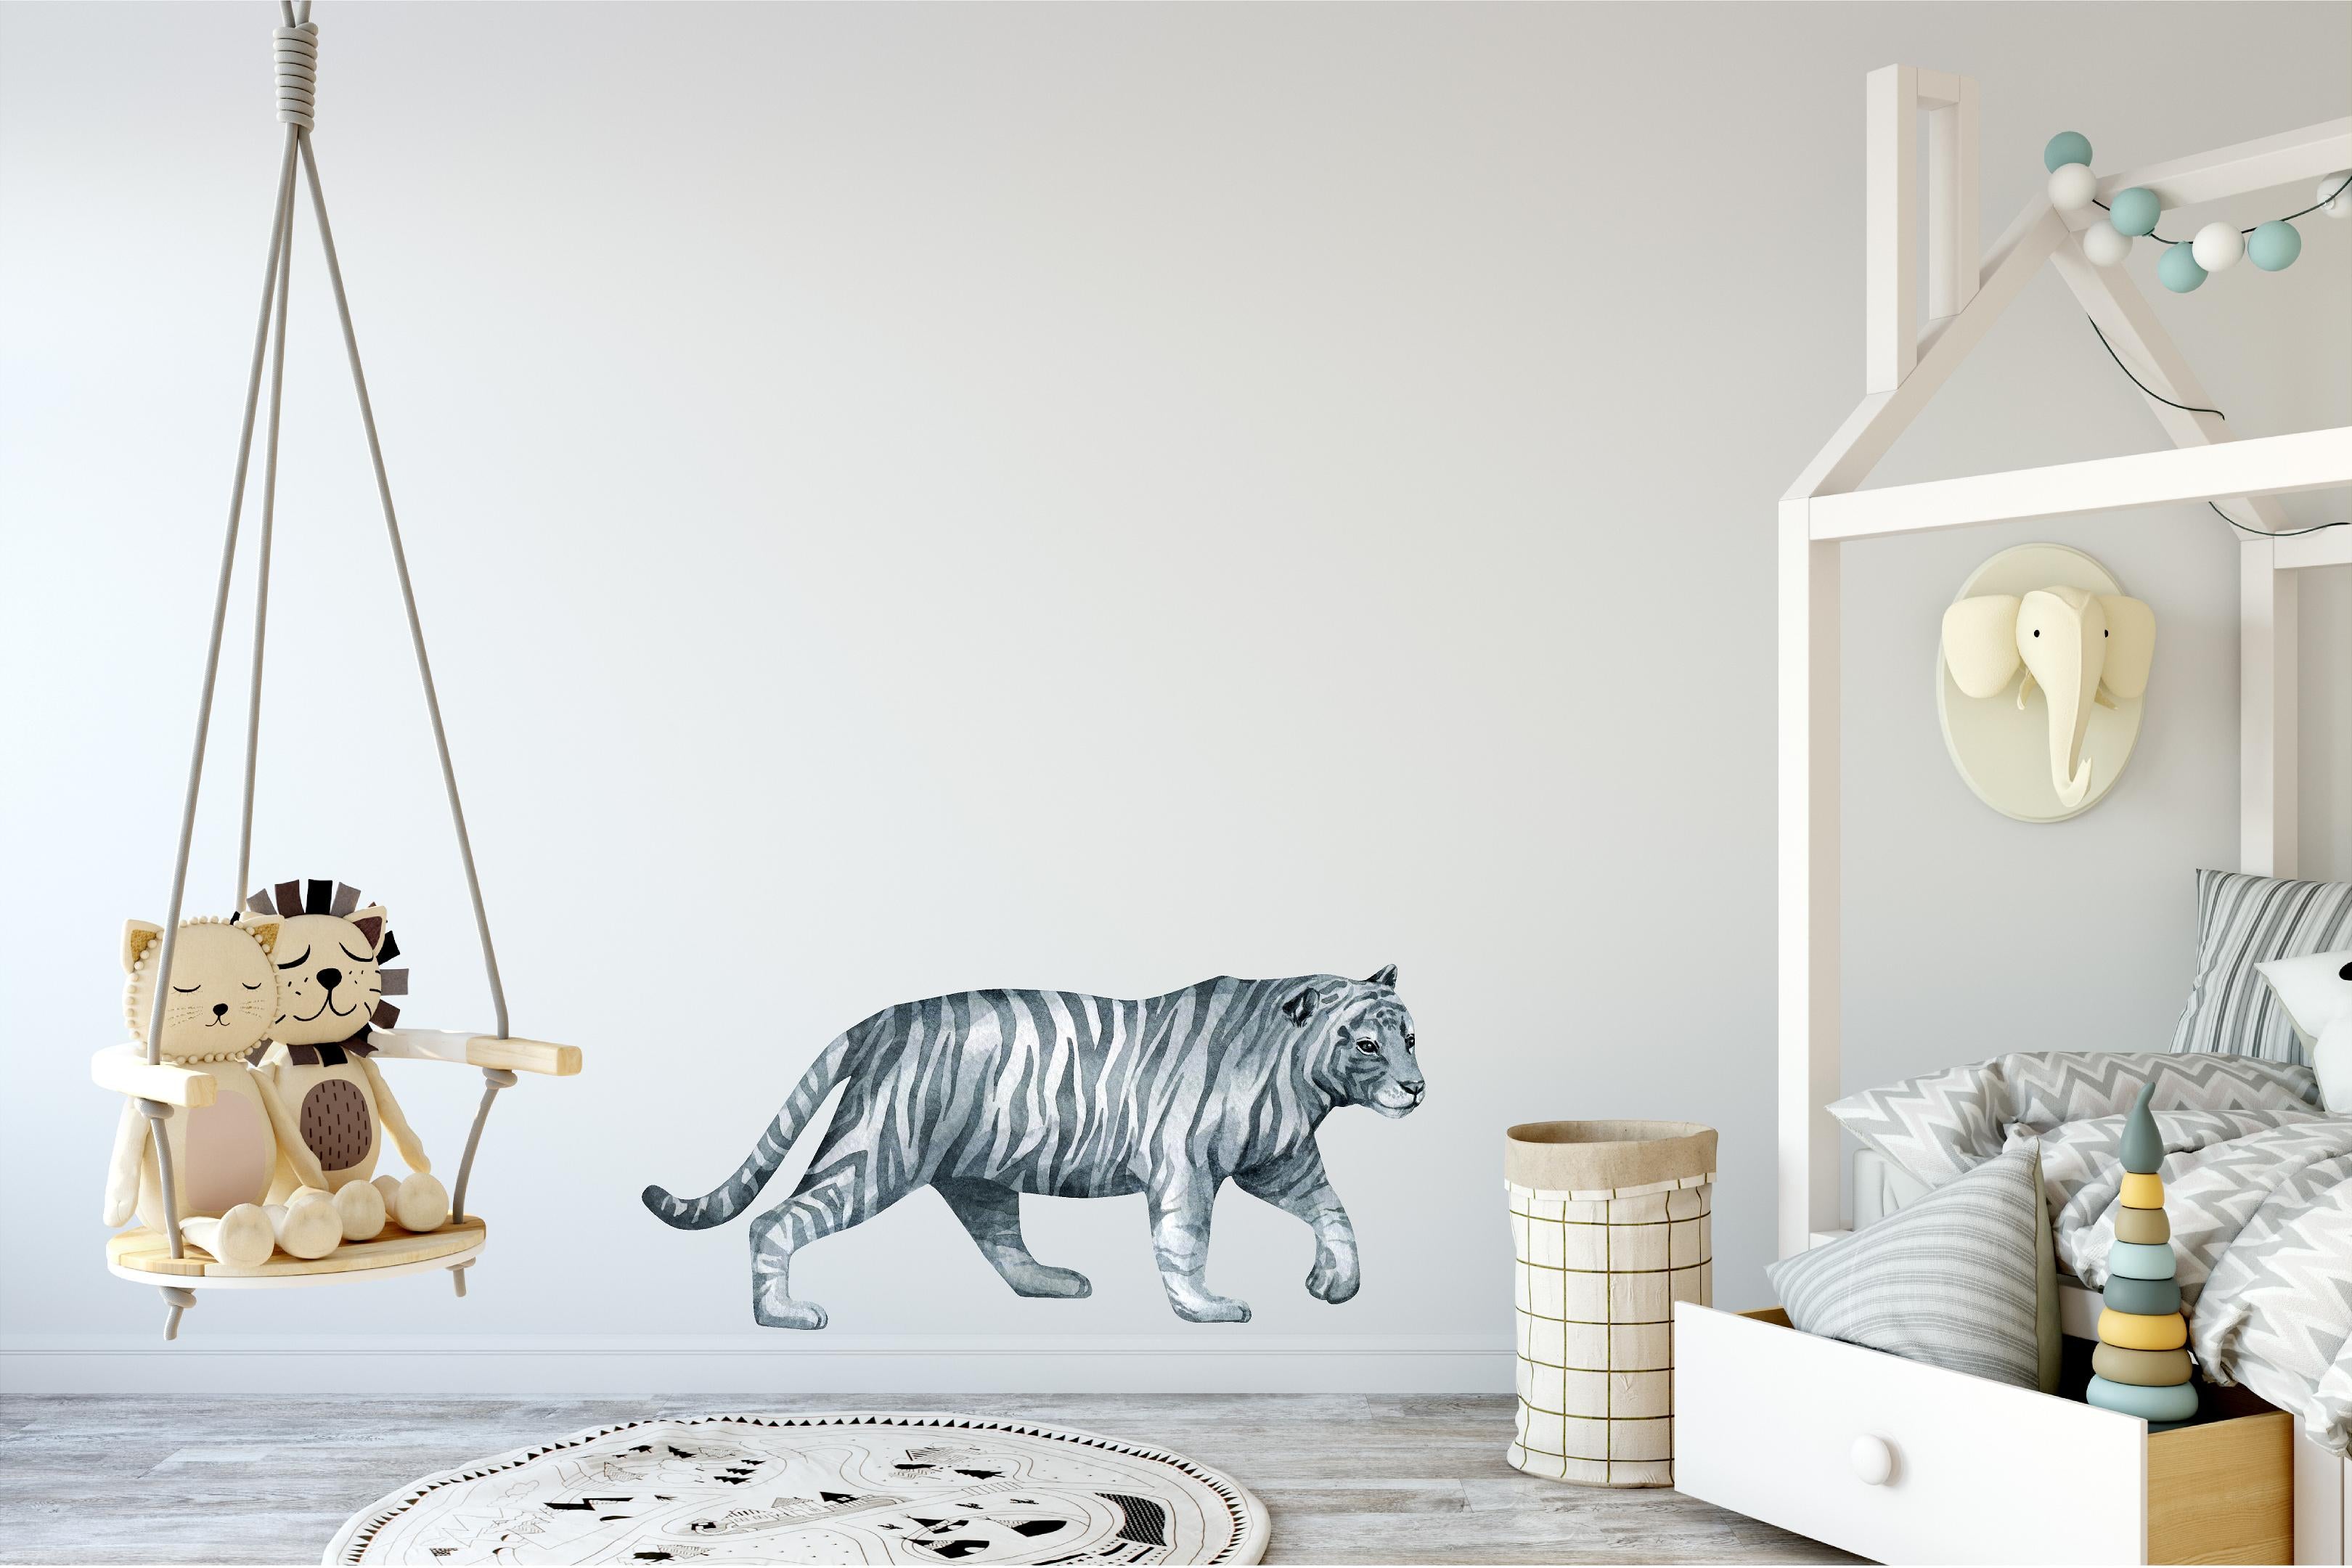 Gray Tiger Wall Decal African Safari Animal Removable Fabric Wall Sticker | DecalBaby